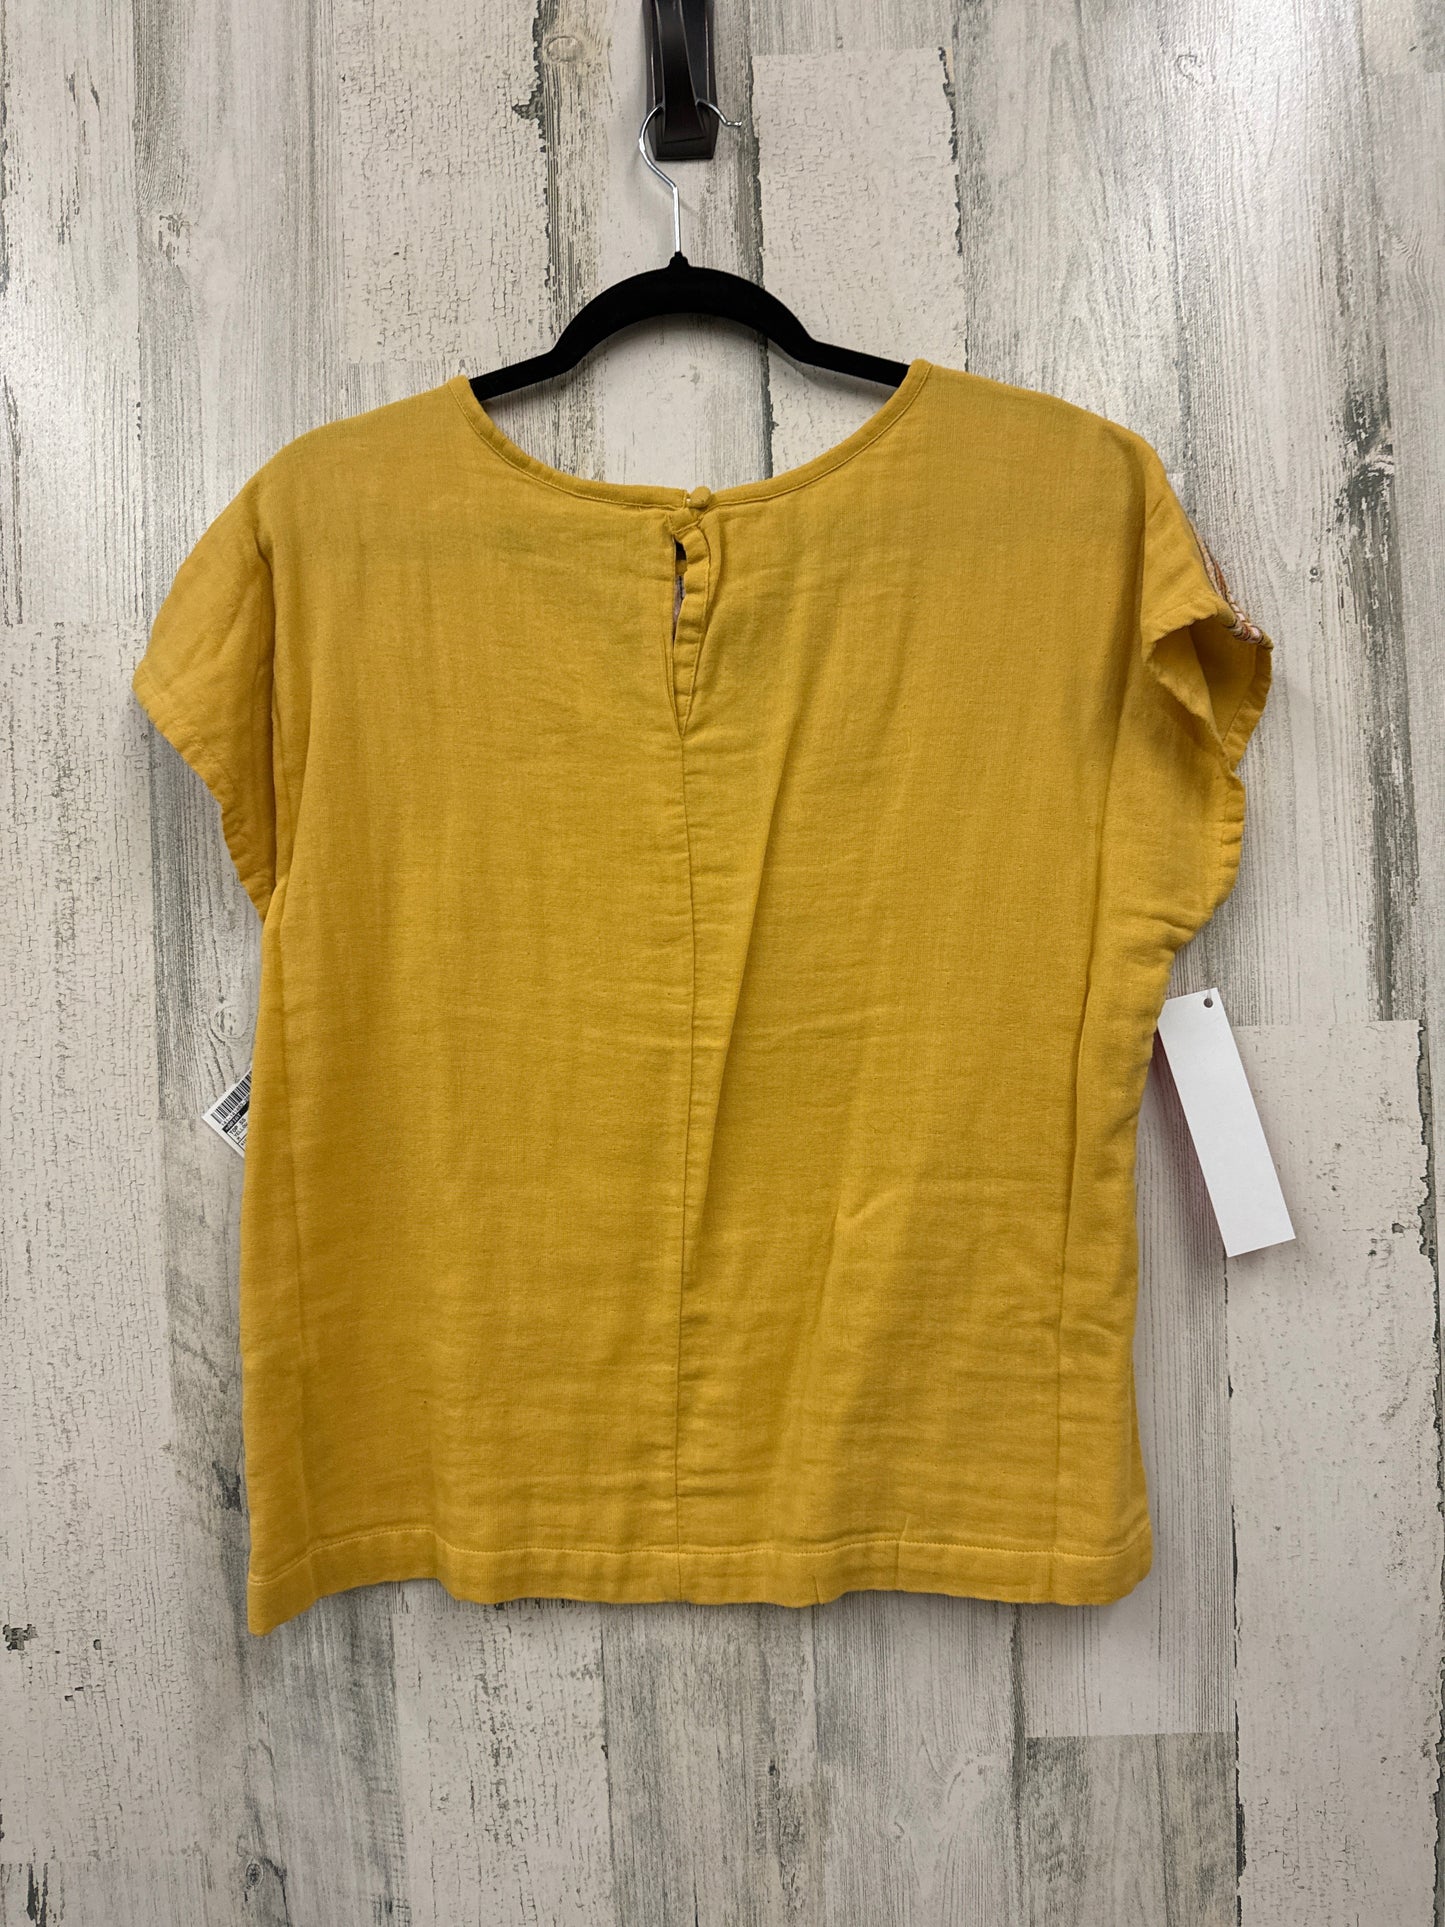 Yellow Top Short Sleeve Ariat, Size M